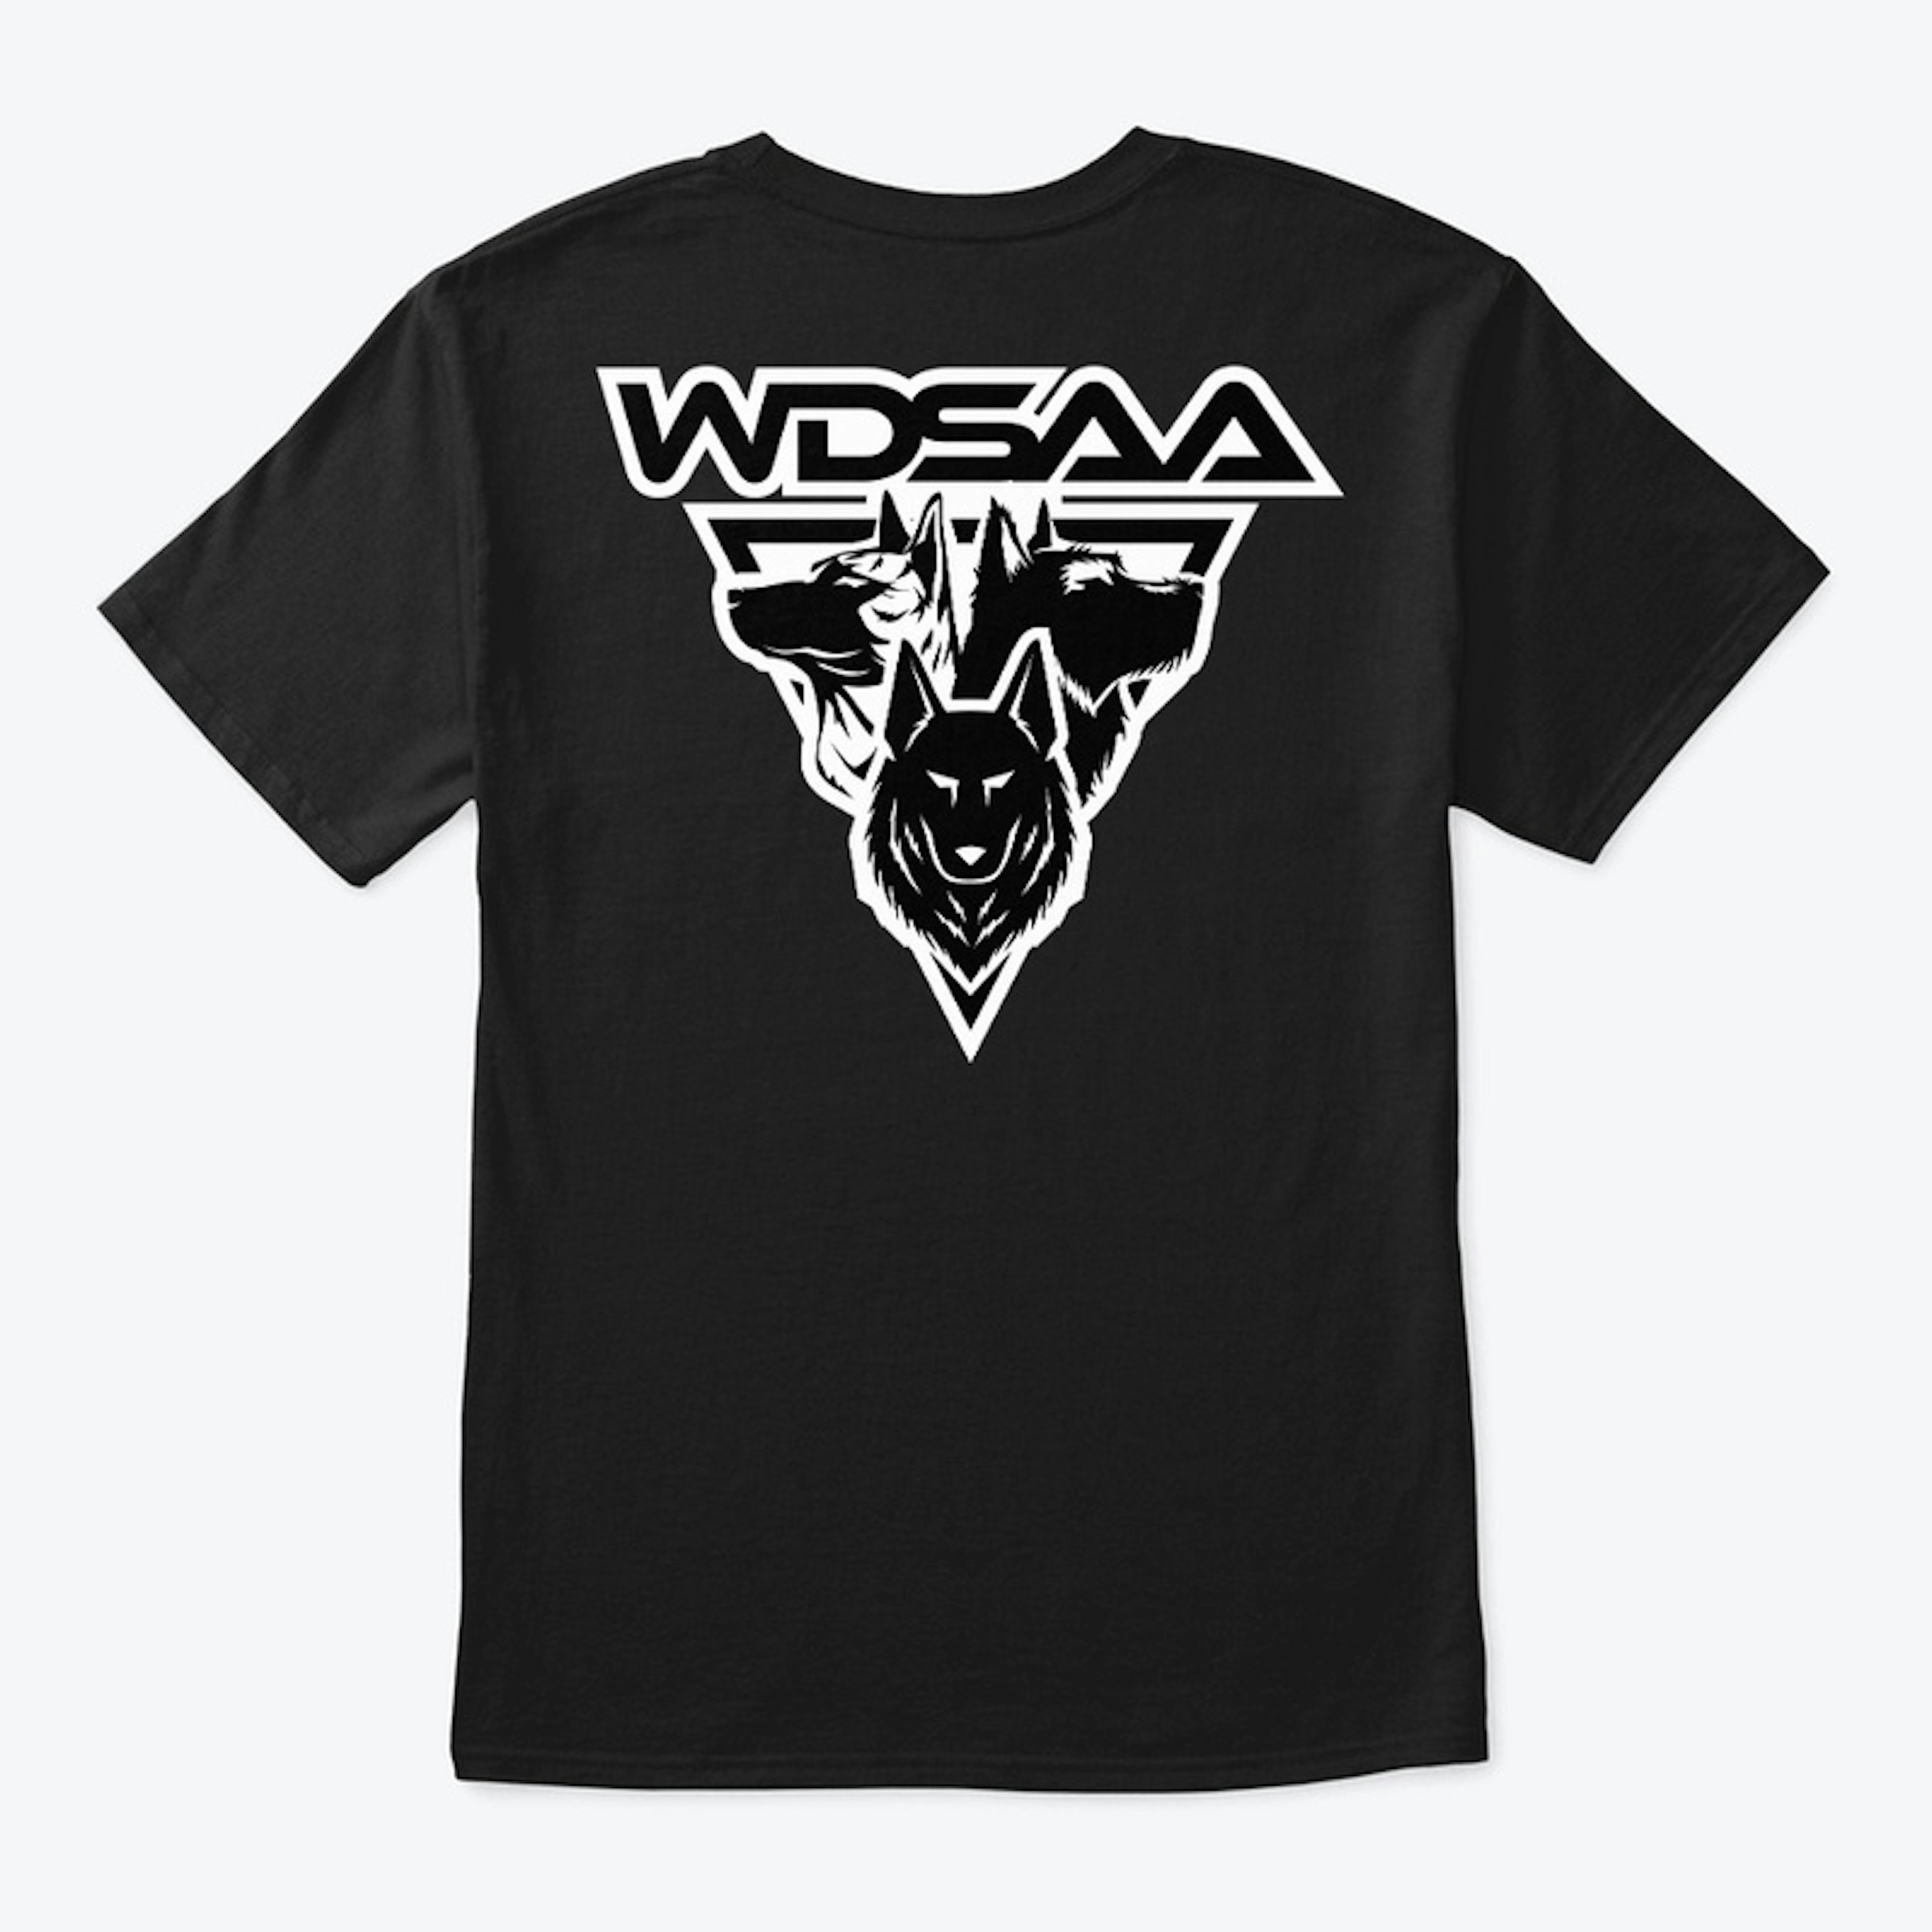 Front and Back WDSAA Logo